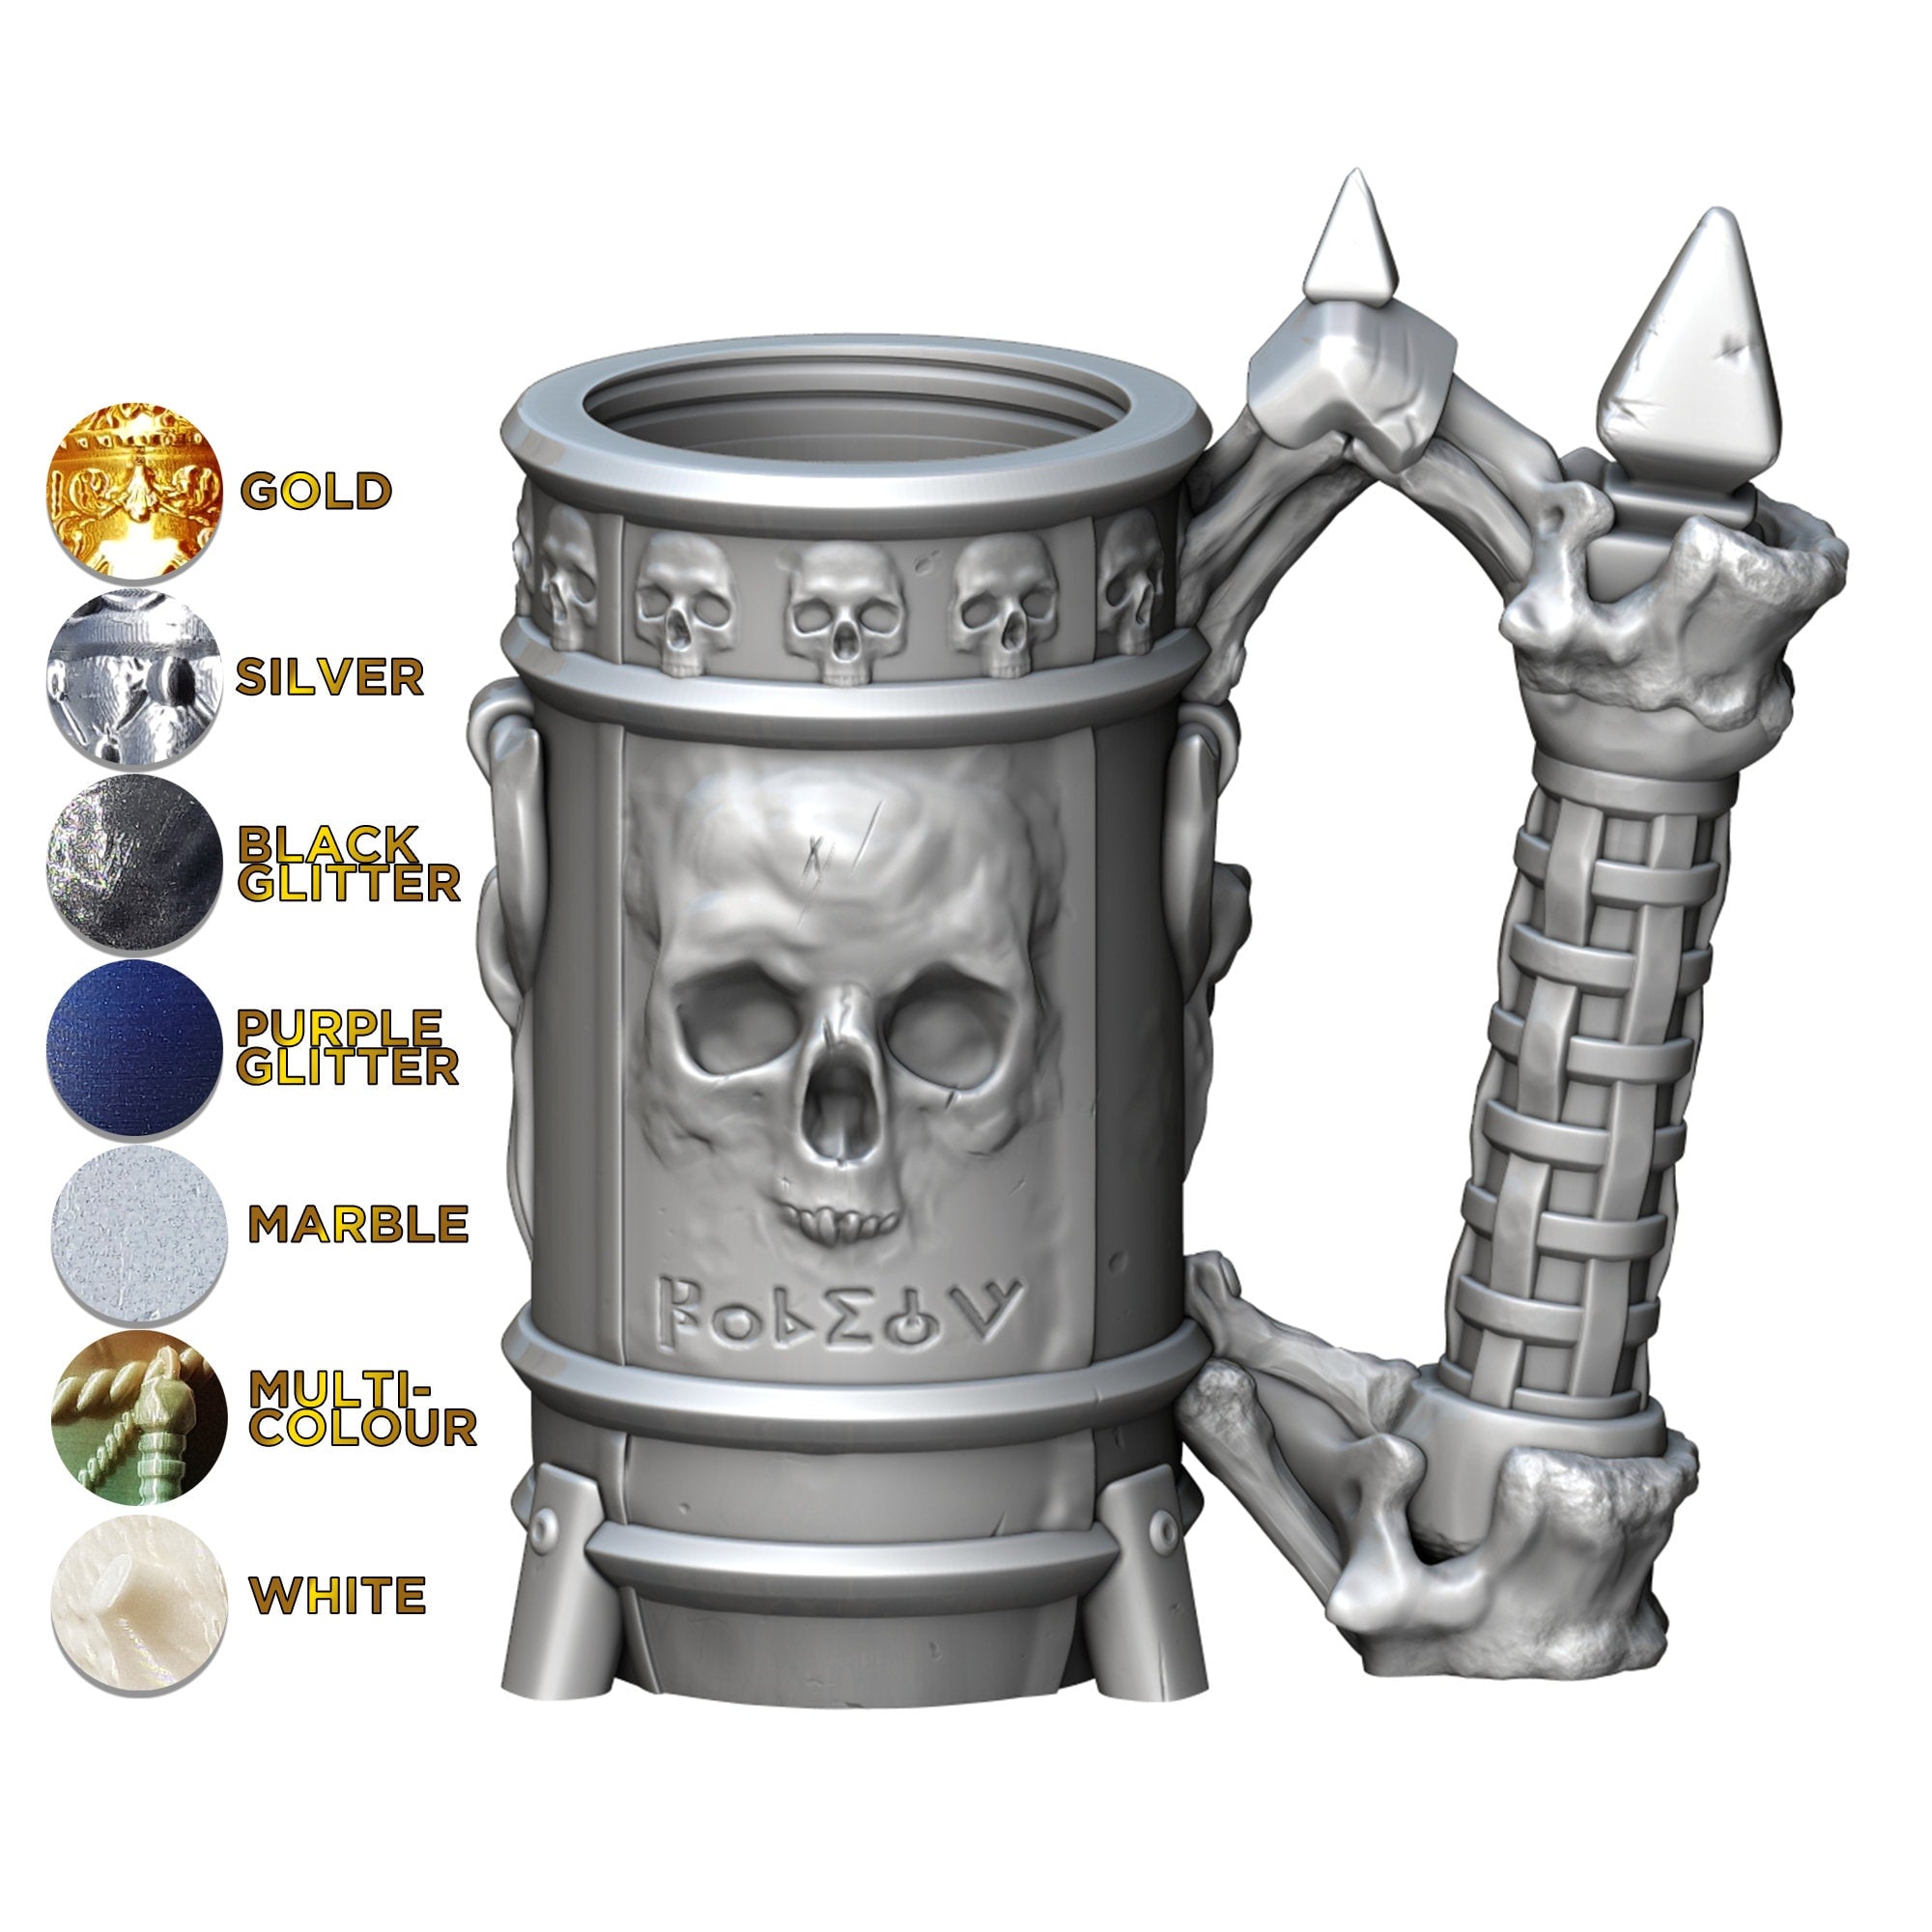 The NECROMANCER | Mythic Mug | Larp | Gaming Zubehör | Tabletop | Dice Cup | Box | Holder | Dungeons and Dragons | DnD | RPG | Fantasy-Role Playing Games